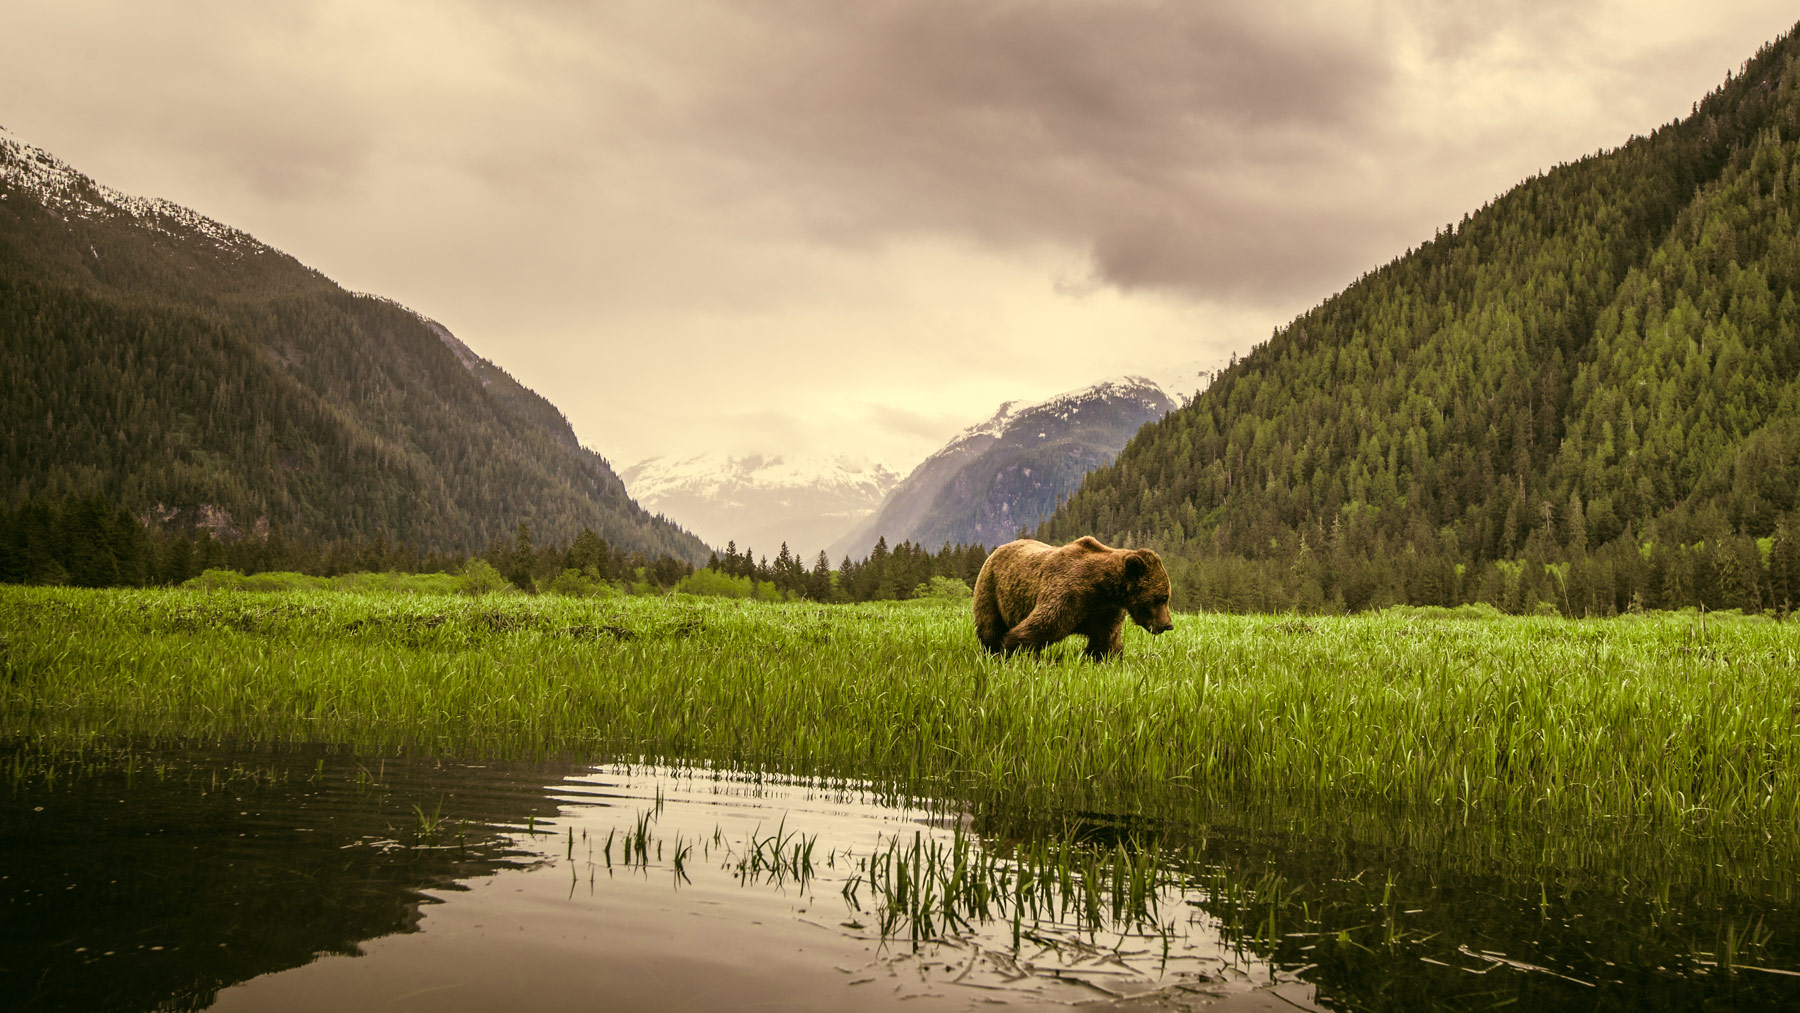 Grizzly bear in the estuary